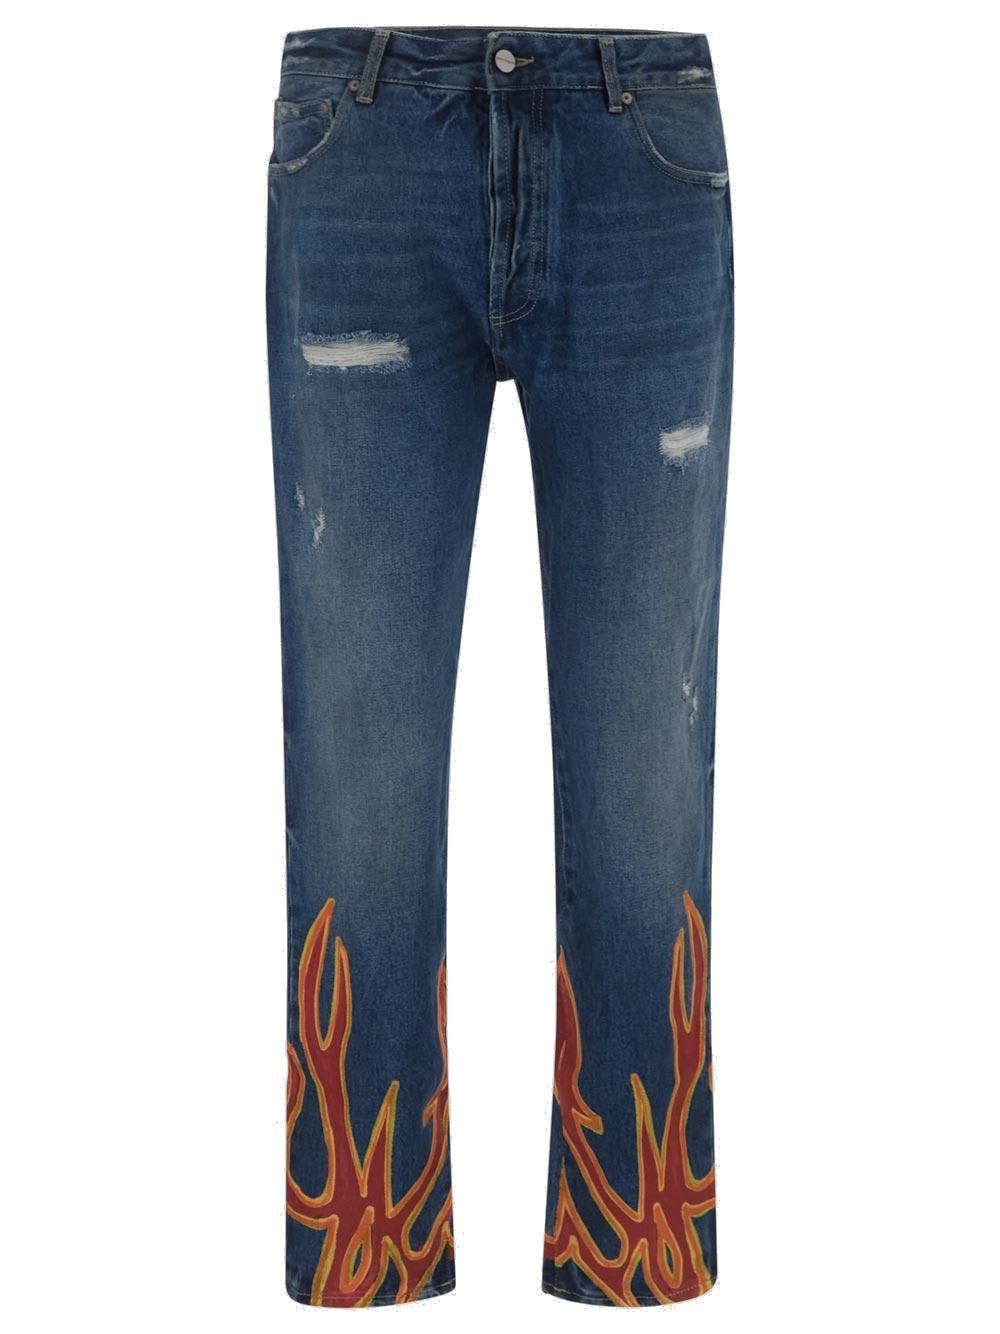 Palm Angels Distressed Flame-printed Jeans